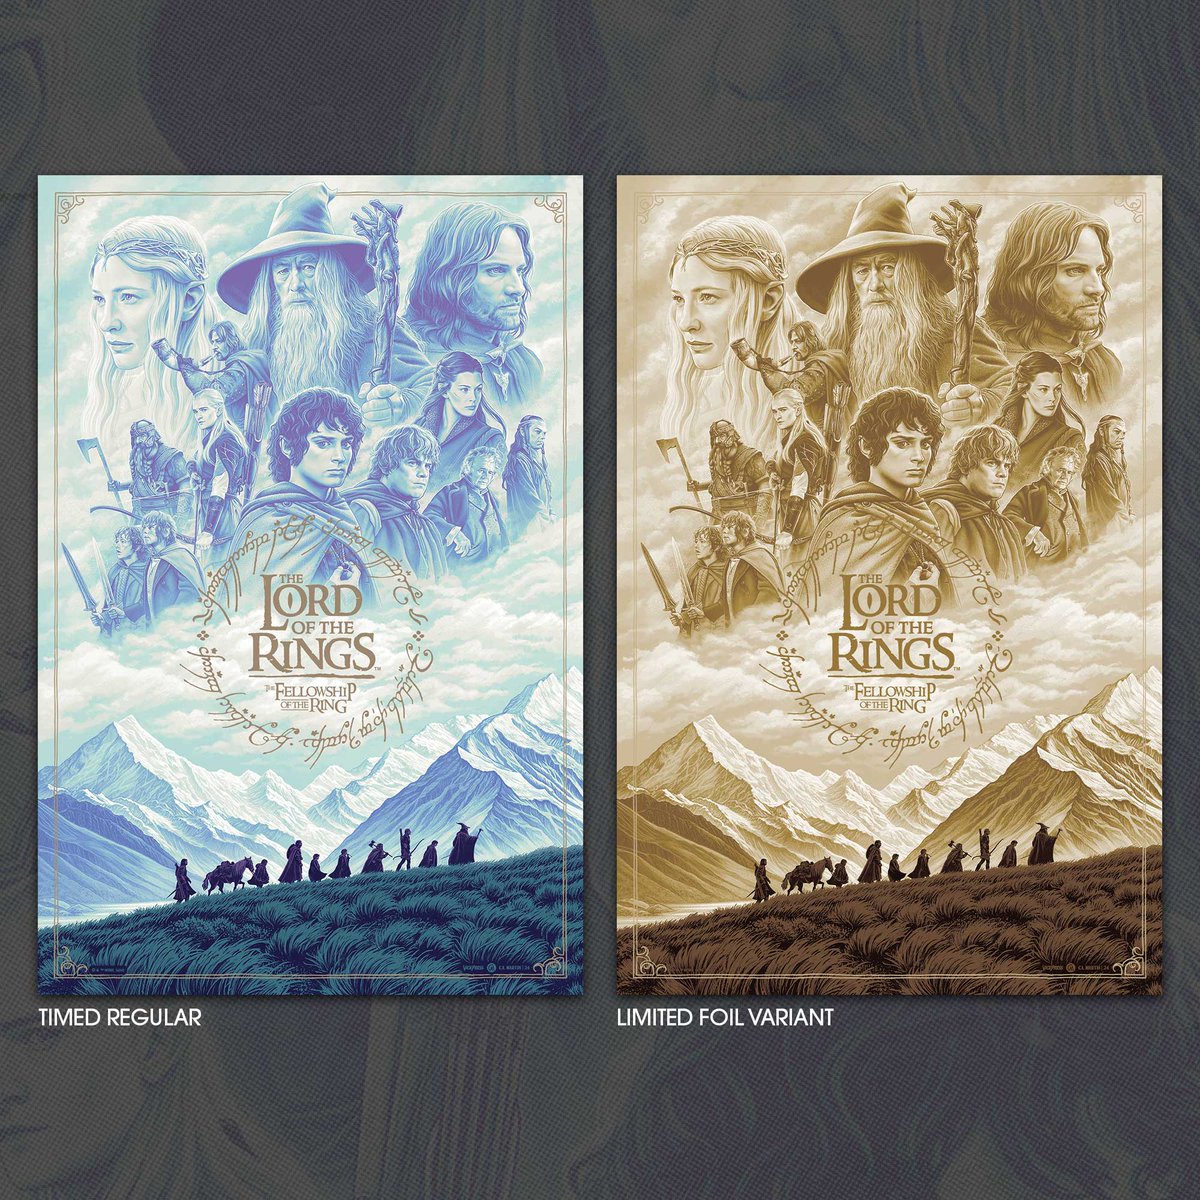 Available now - The Lord of the Rings: The Fellowship of the Ring limited edition, officially licensed poster by @camartinart, released in collaboration with @BottleneckNYC. Vice-Press.com